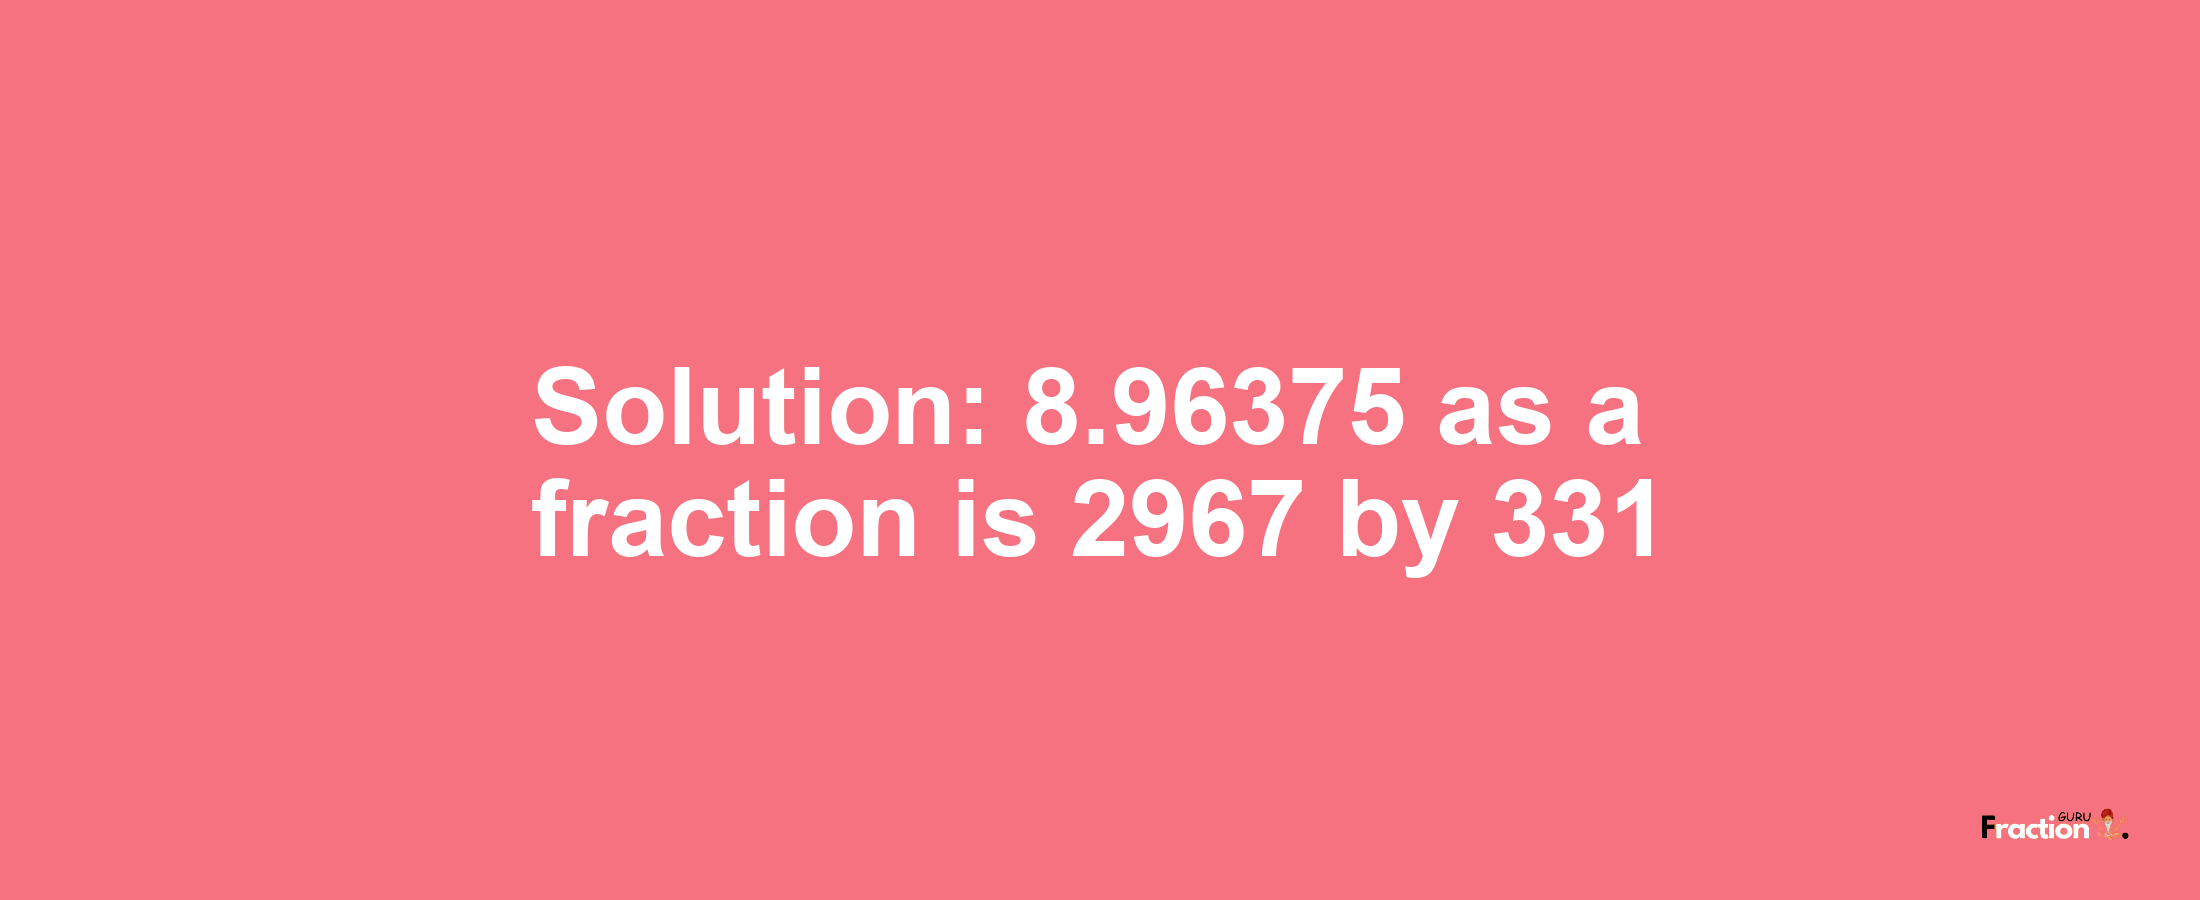 Solution:8.96375 as a fraction is 2967/331